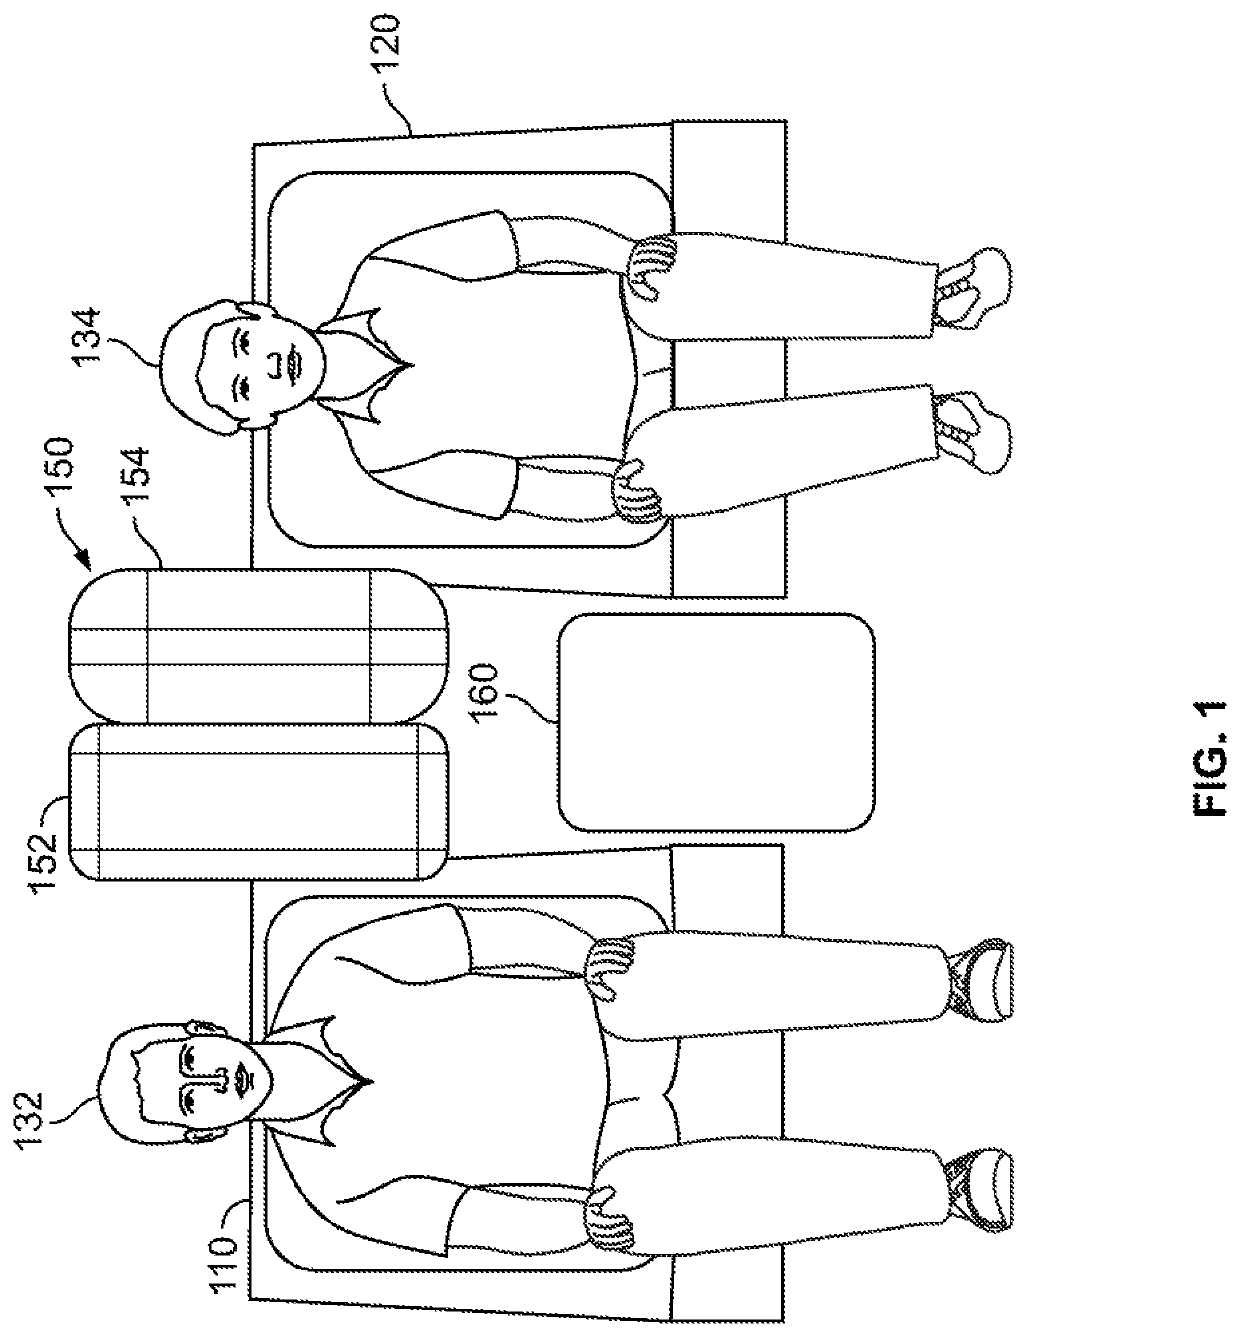 Airbag arrangement for protection in a far-side vehicular crash